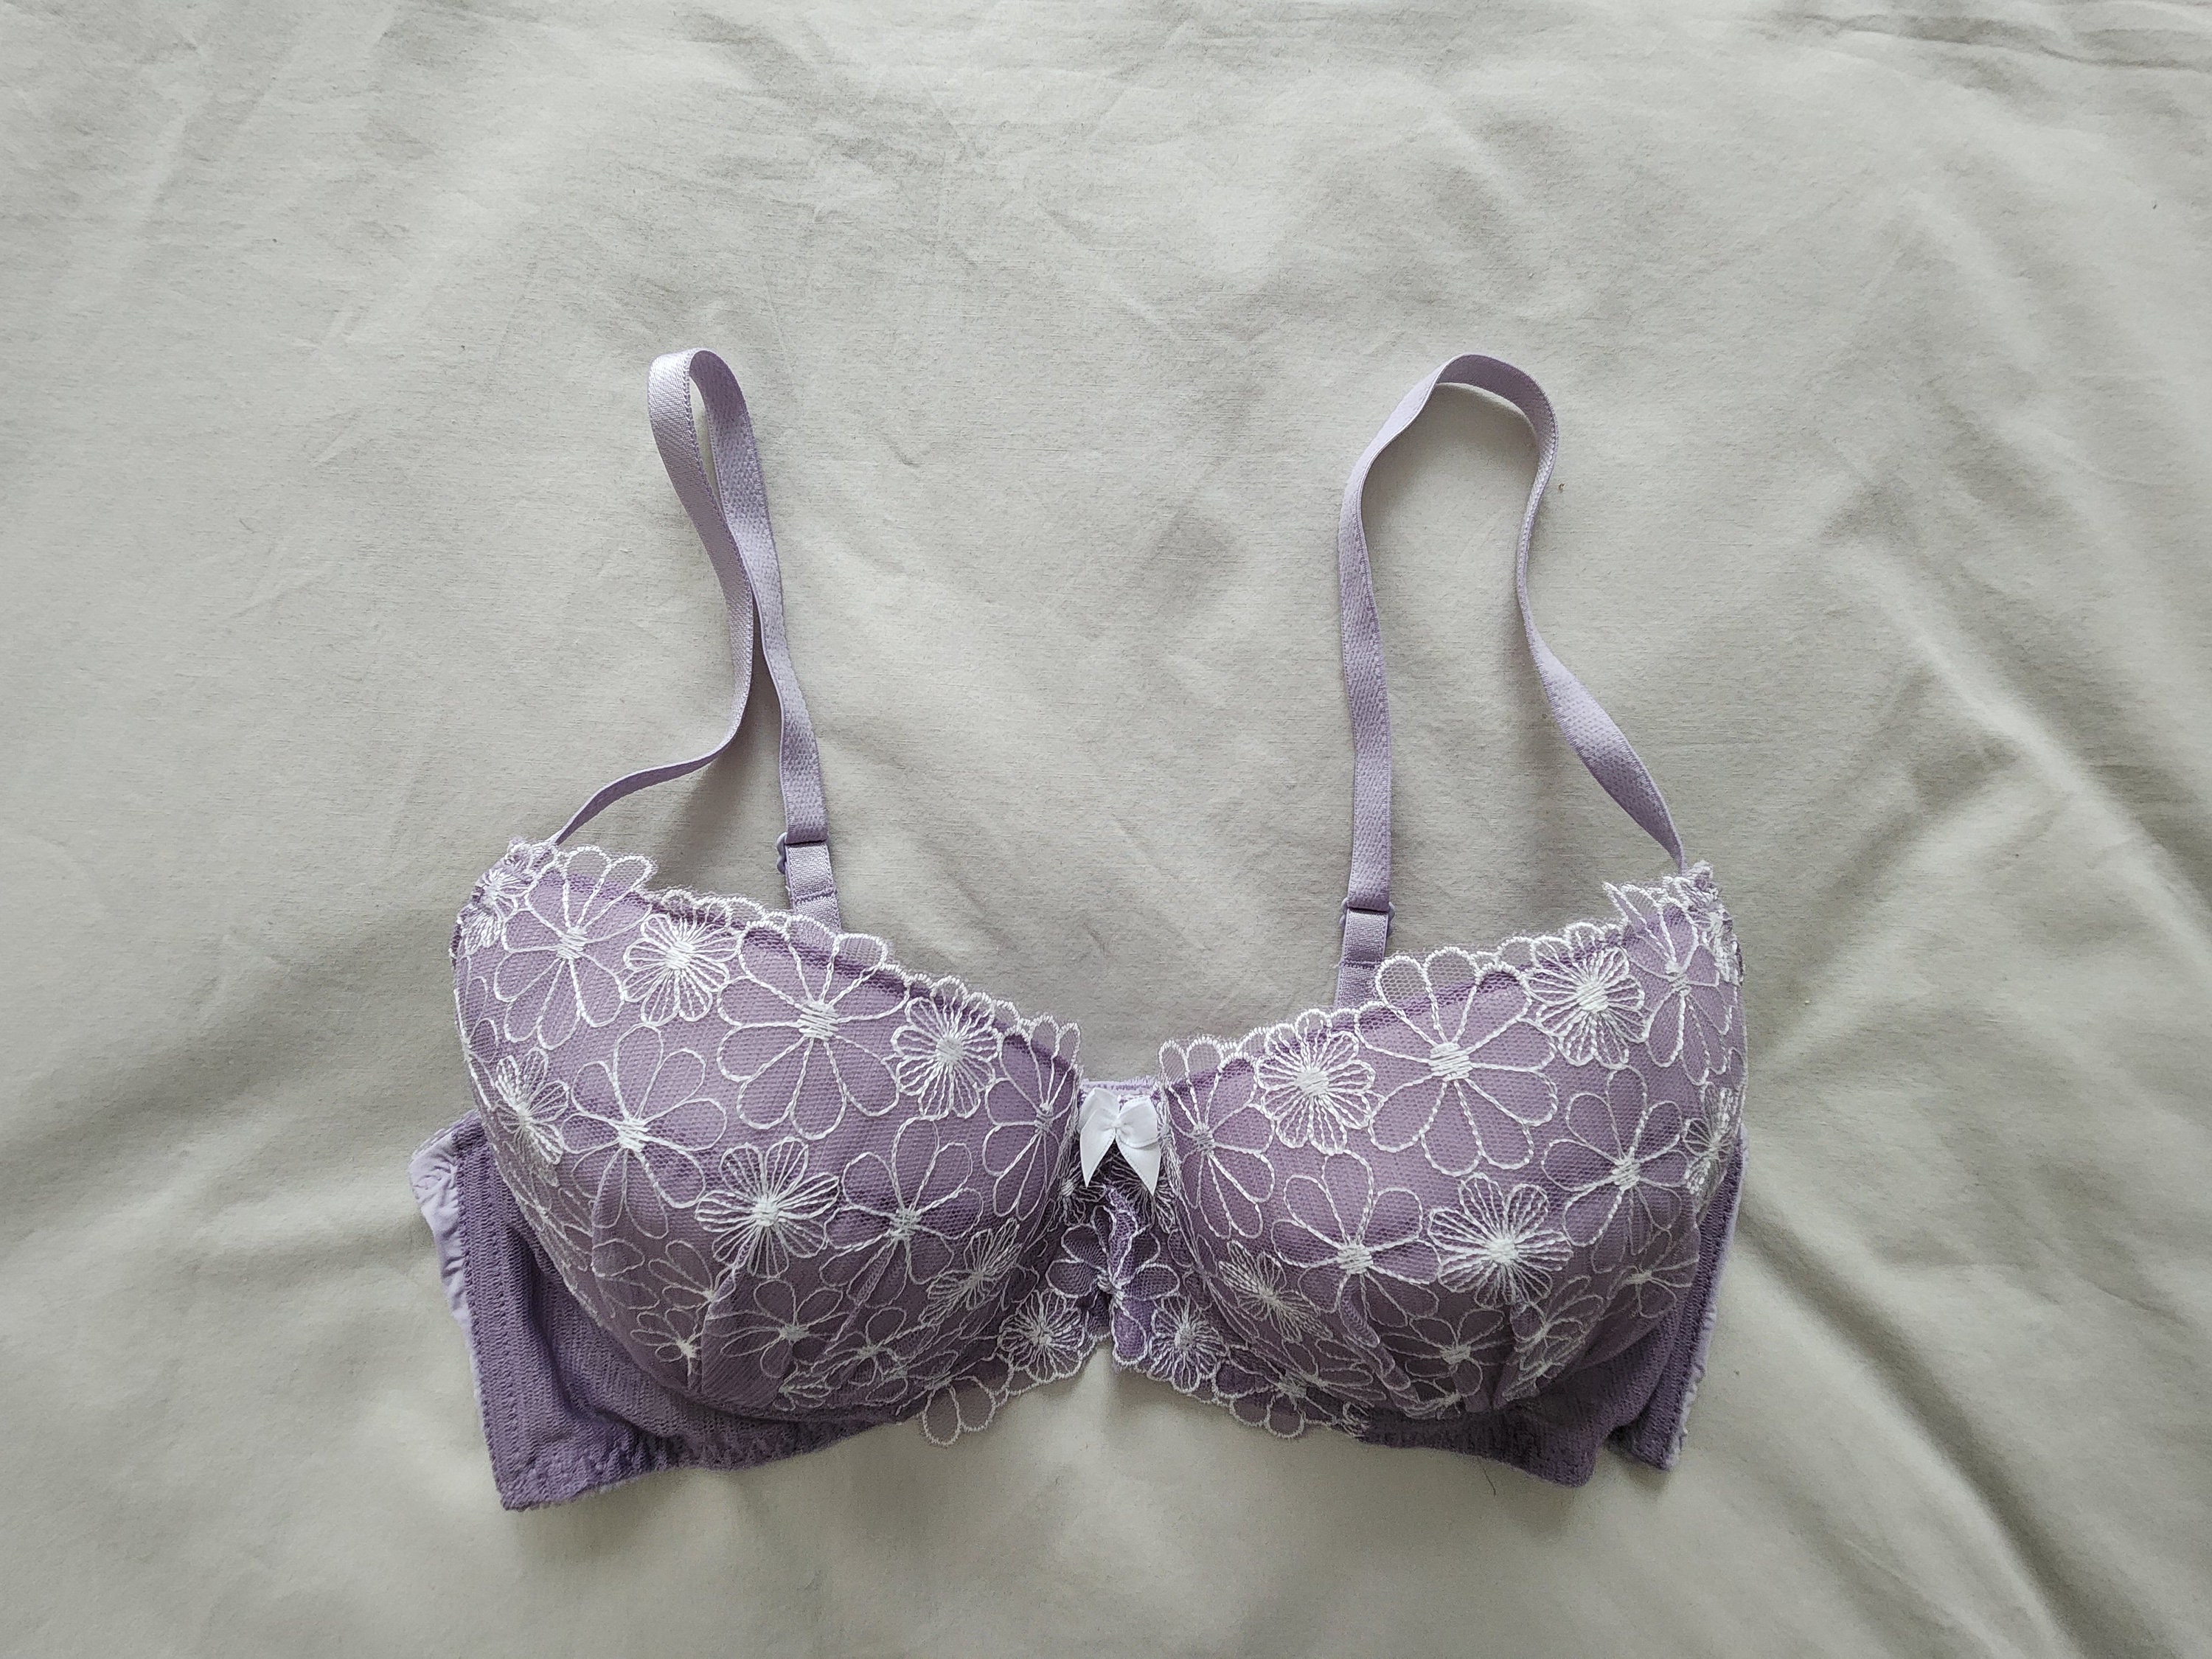 Vintage New Old Stock Bra From Japan size 14B Aus & 36B UK/US, Japan D80 -   Finland